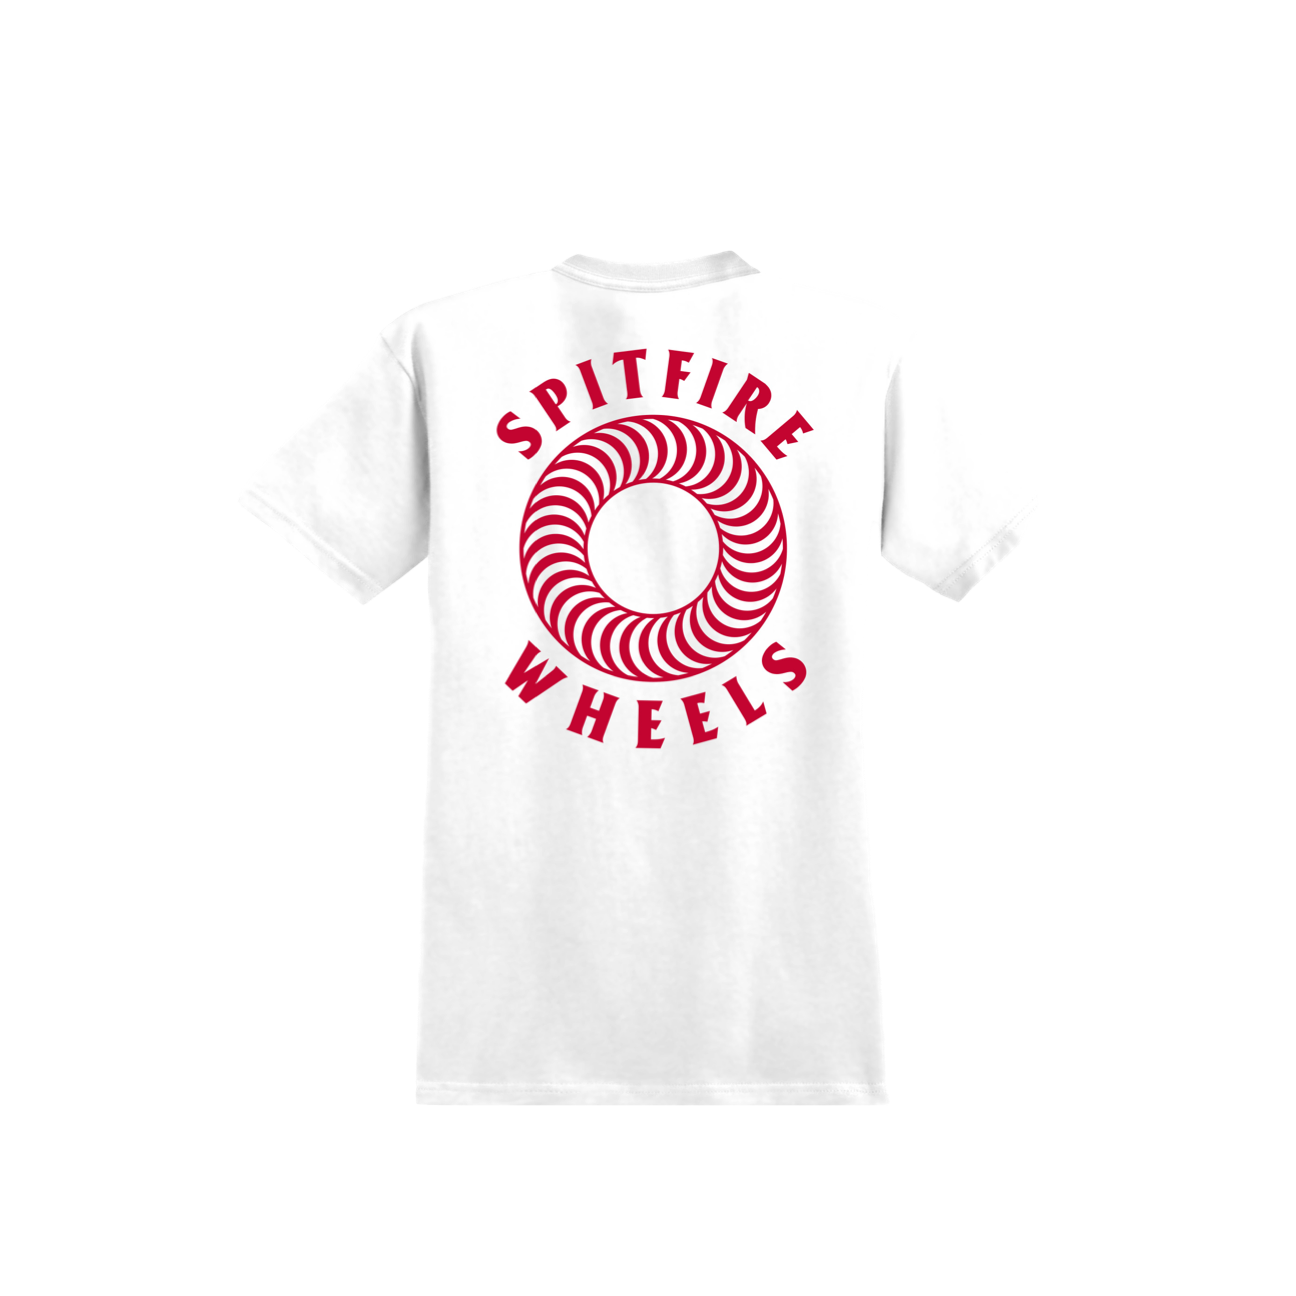 SPITFIRE - HOLLOW CLASSIC YOUTH TEE - WHITE/RED